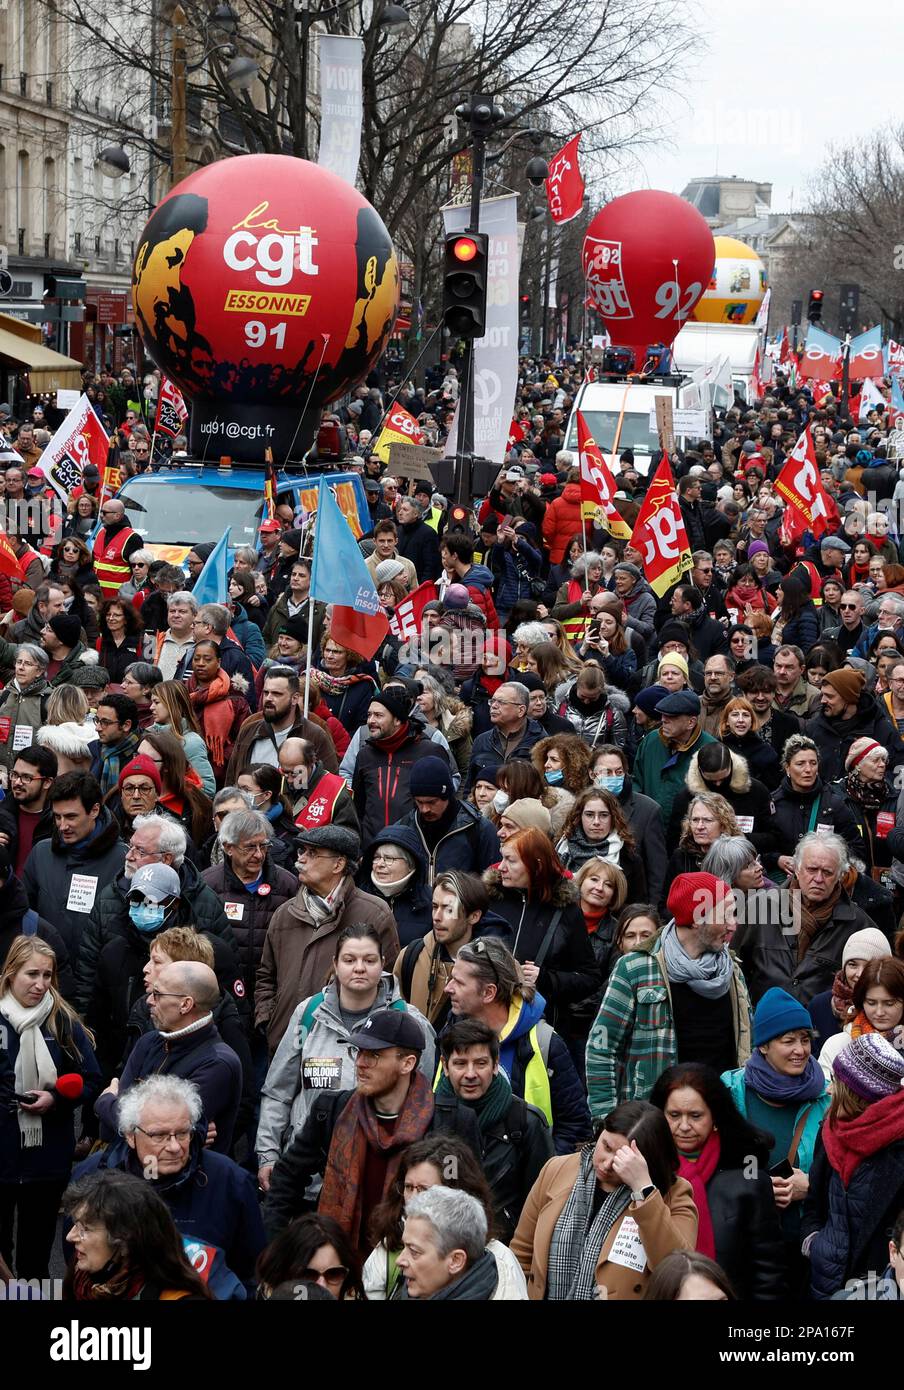 General Confederation of Labour (CGT) trade union signs are seen as demonstrators march against the government's pension reform plan in Paris, France, March 11, 2023. REUTERS/Benoit Tessier Stock Photo